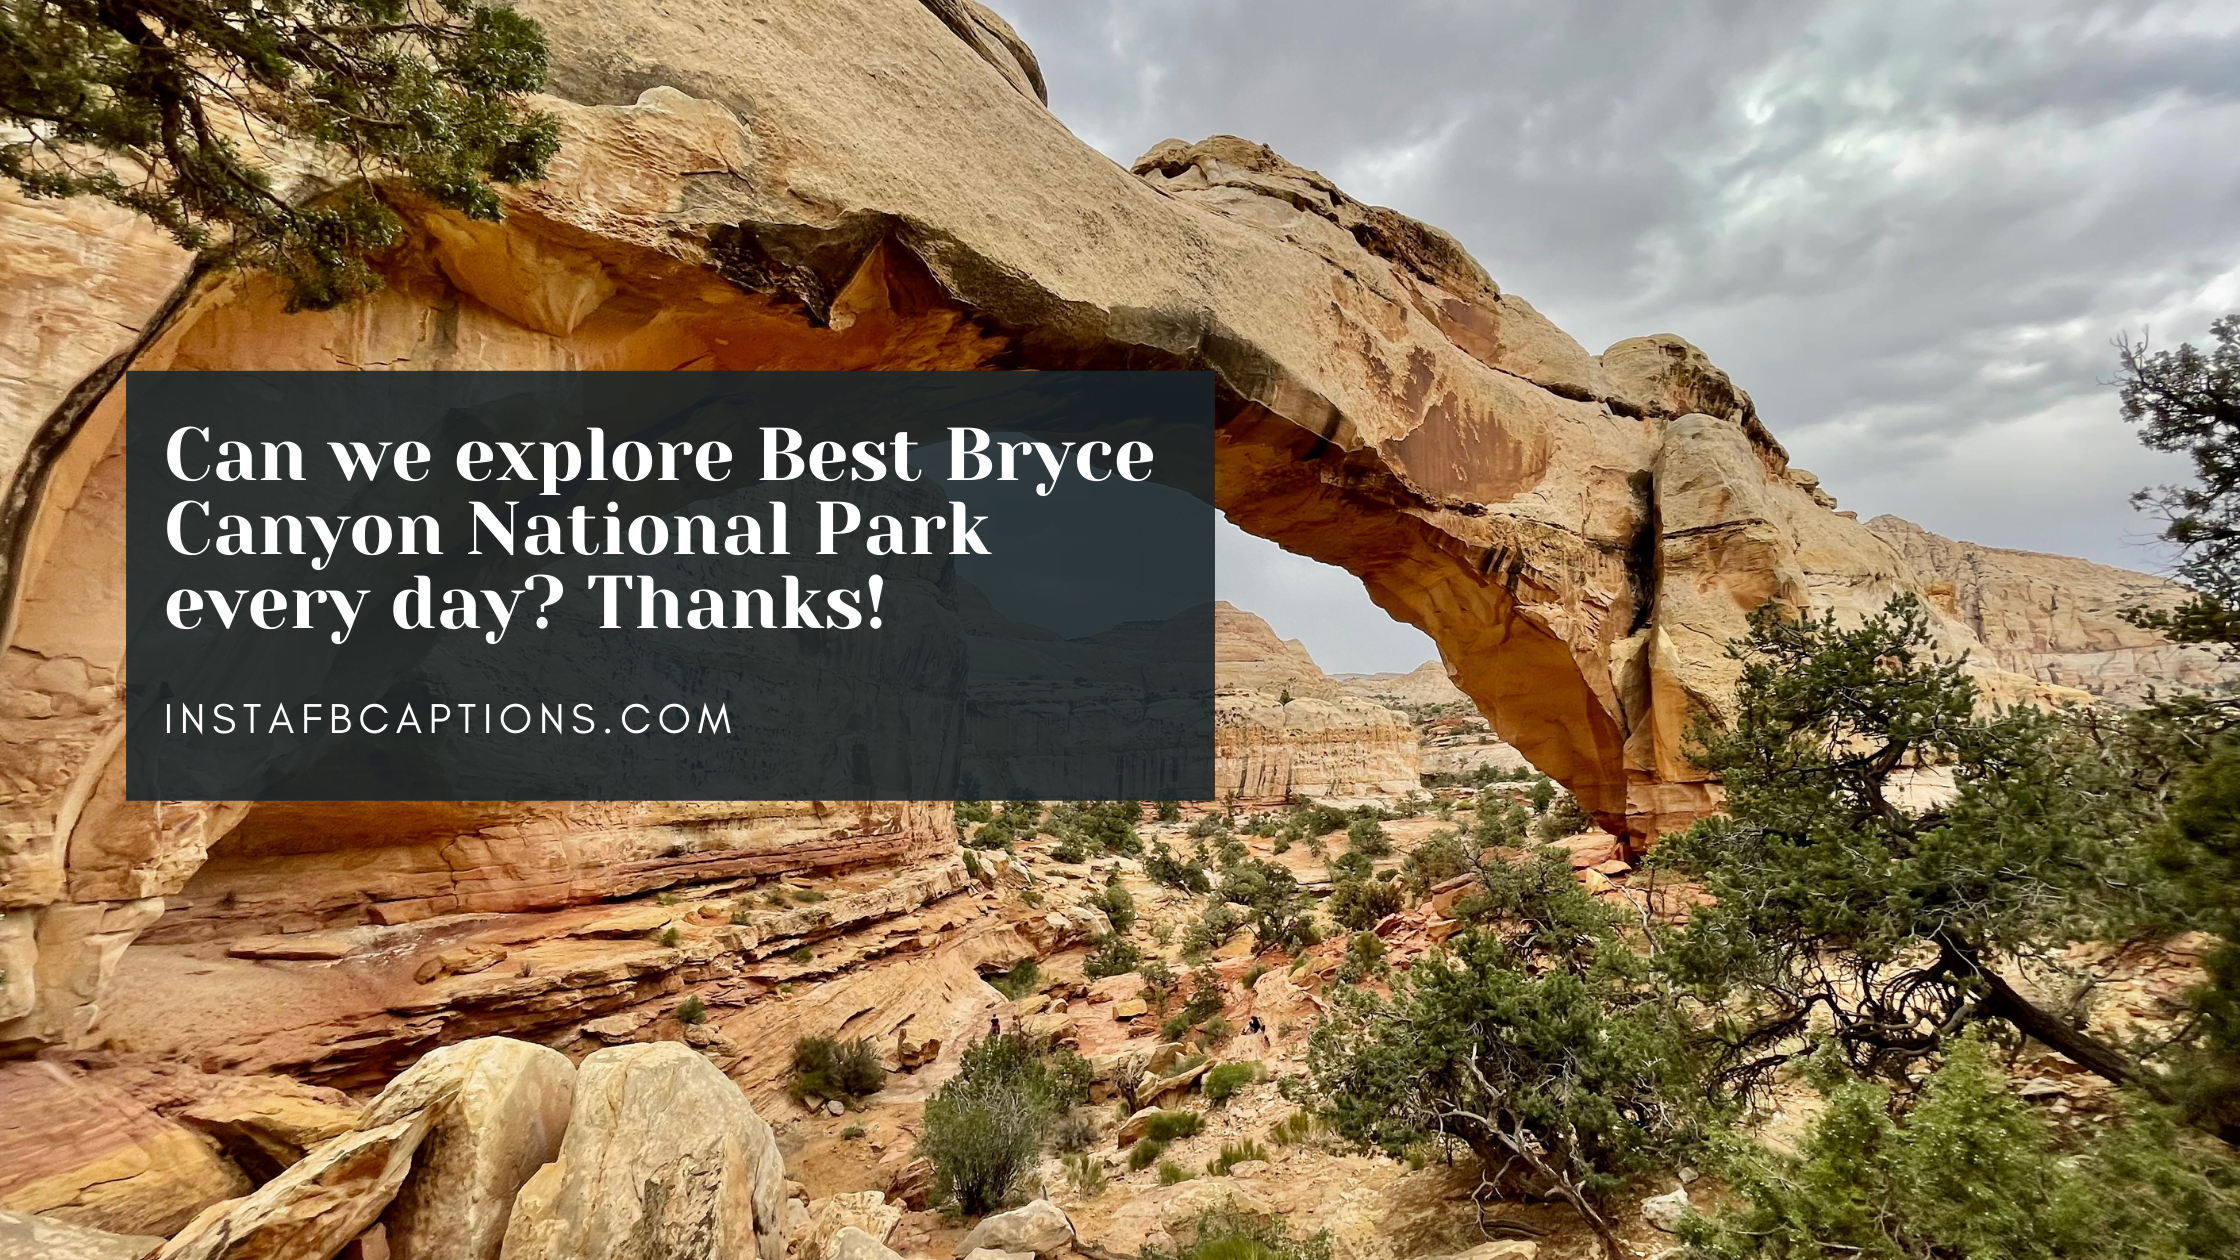 Some Of The Best Bryce Canyon National Park Captions  - Some of the Best Bryce Canyon National Park Captions  - 88 Bryce Canyon National Park Instagram Captions in 2022